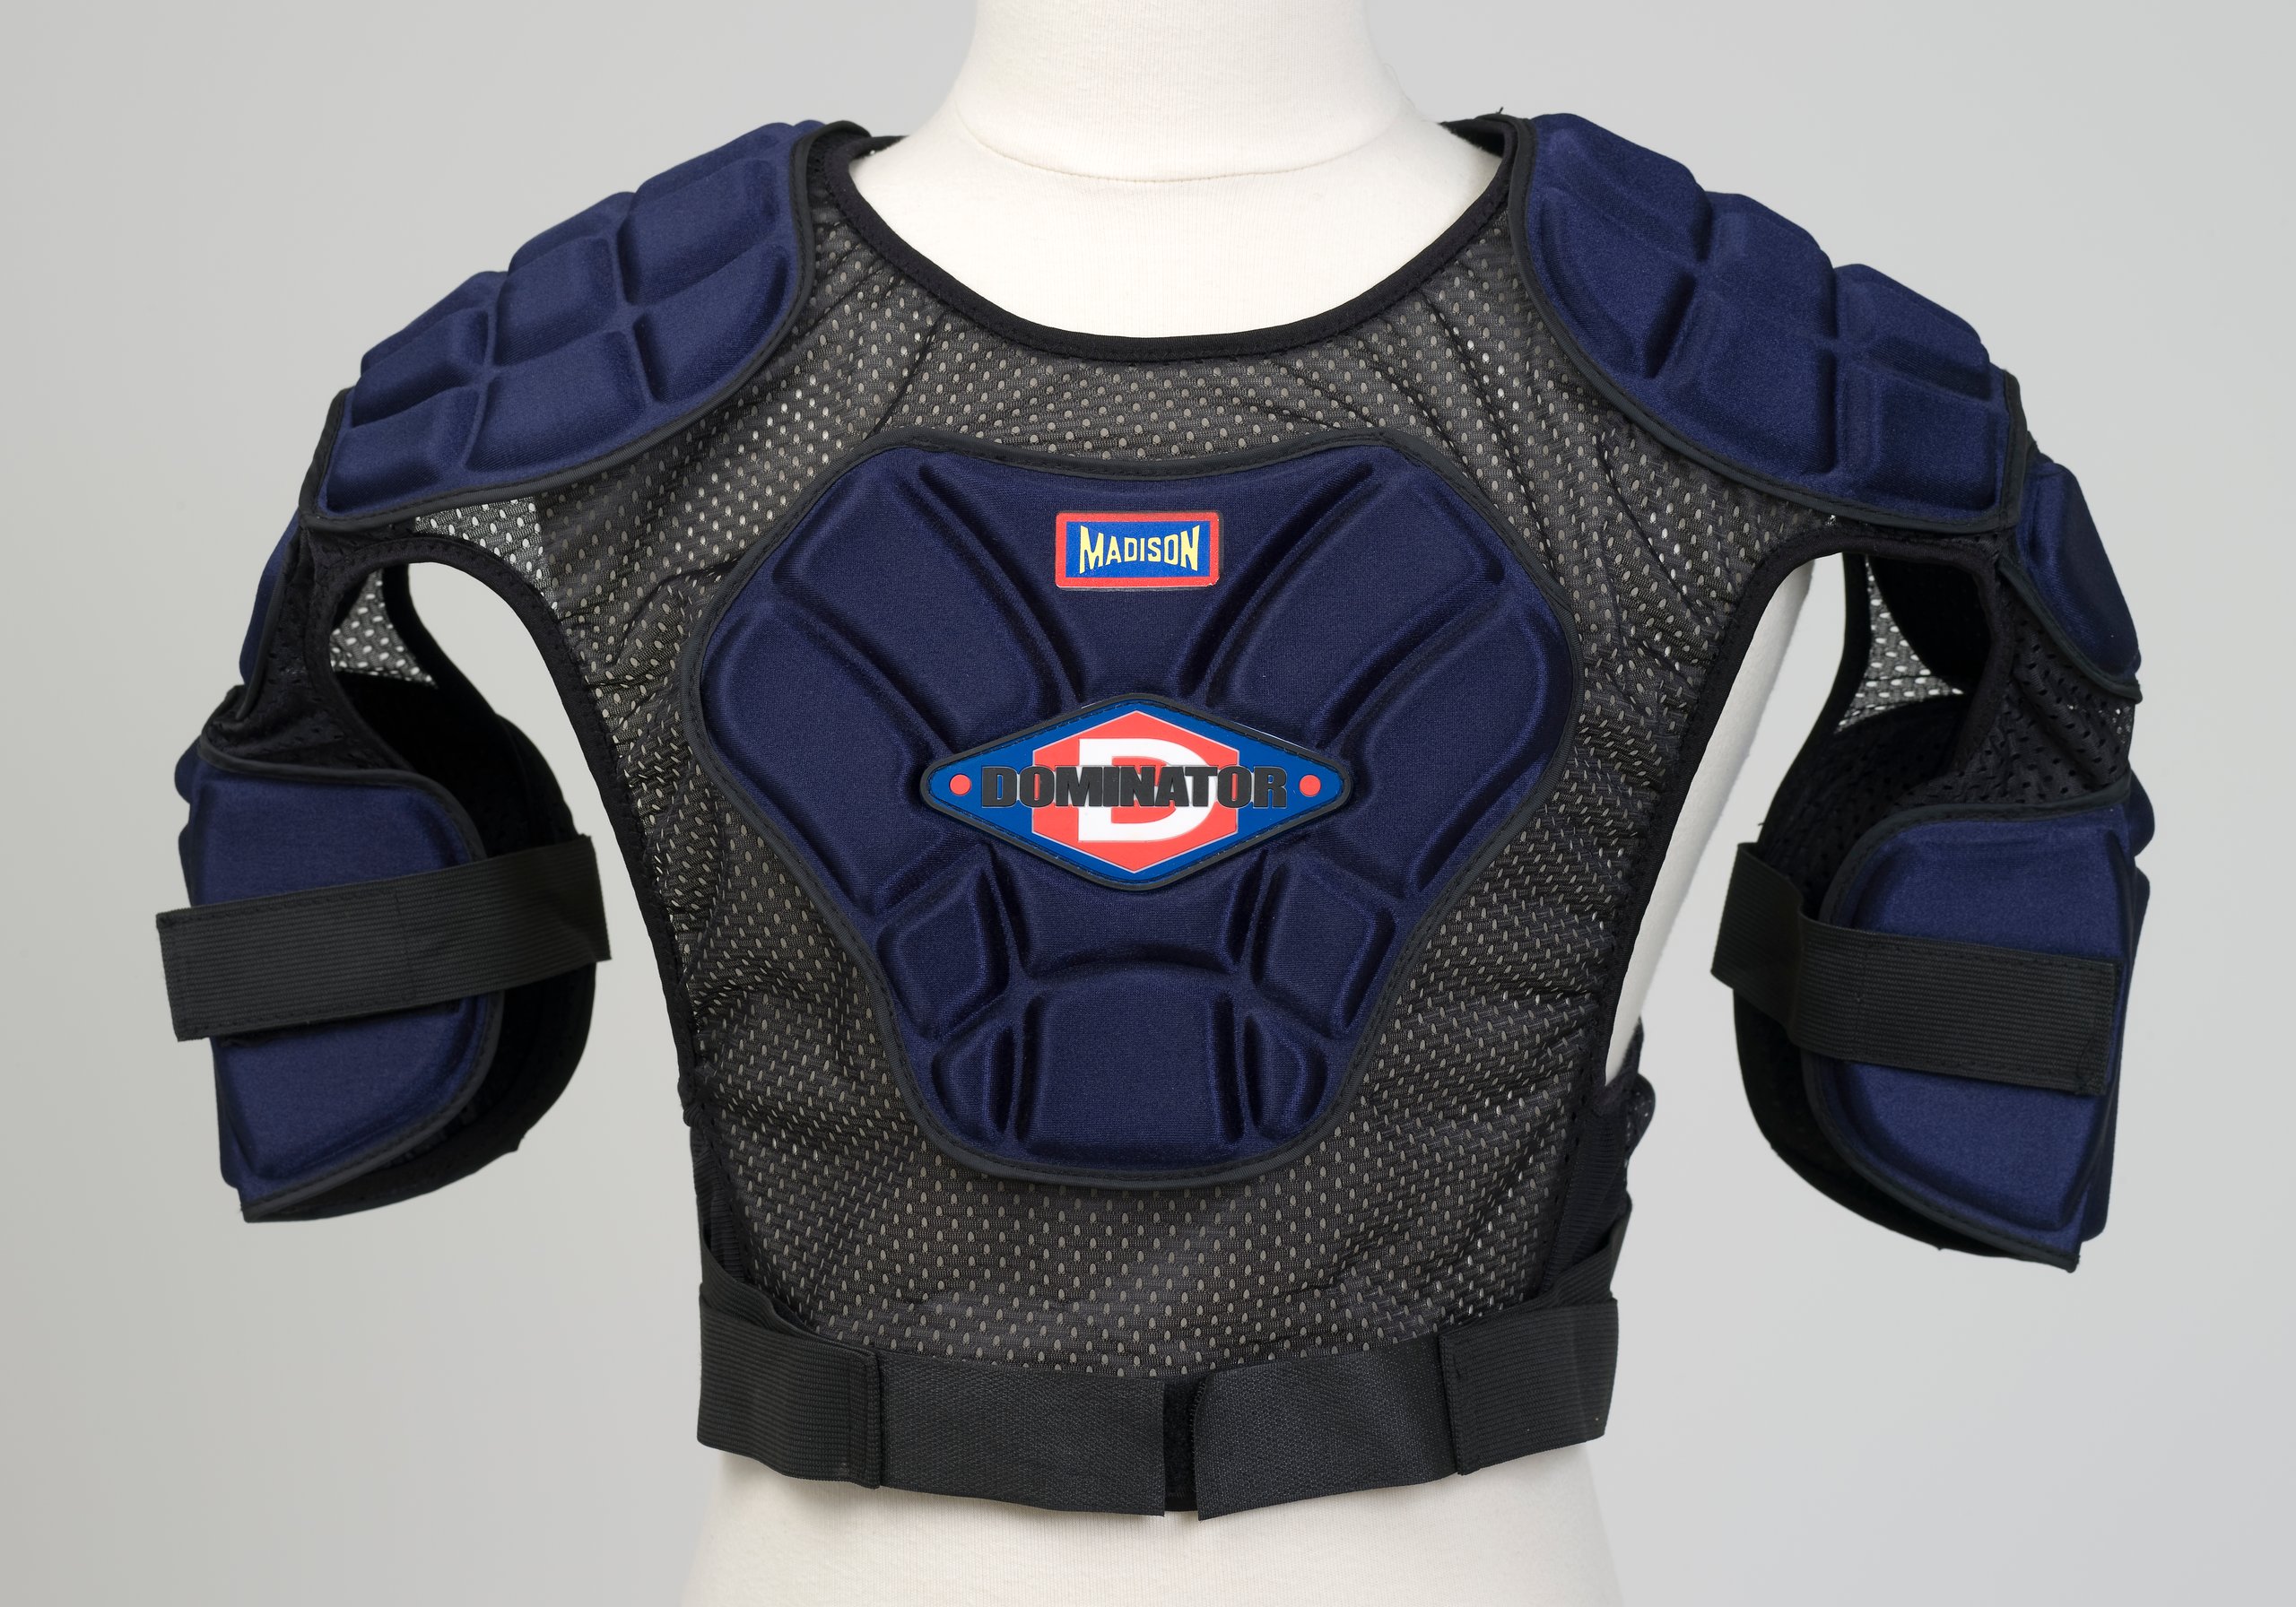 Protective shoulder and chest padding and packaging